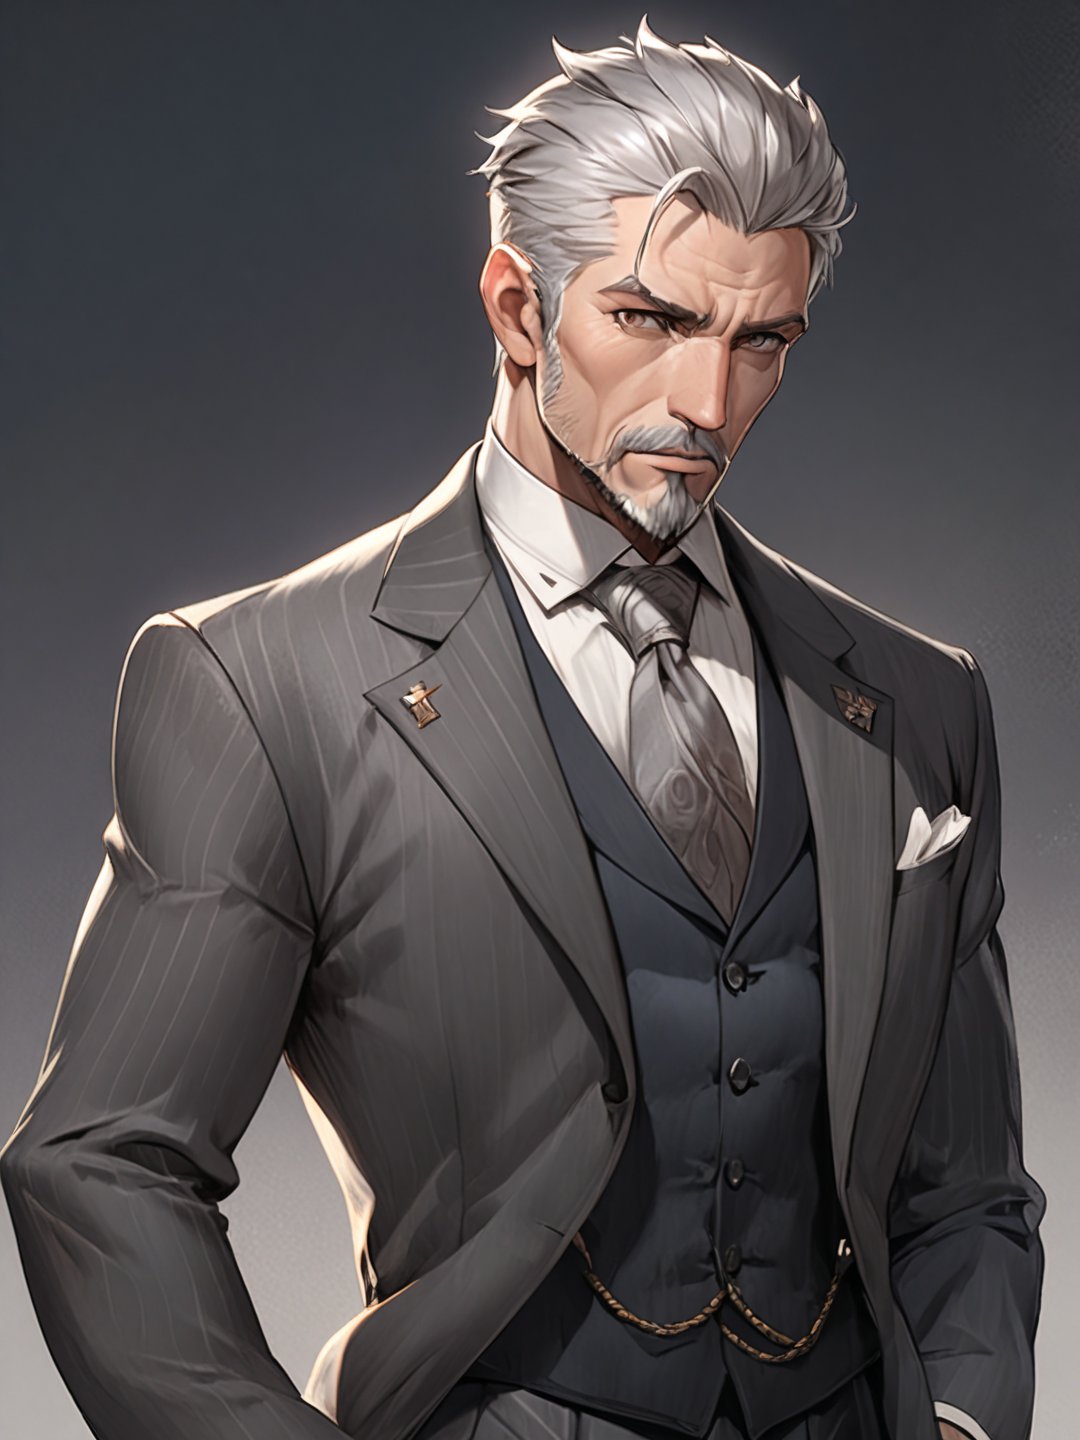 ((masterpiece:1.1)),  (A weathered veteran male), (gray-haired in appearance), (rugged face), ((eyes are sharp but kind)), ((Short hair)) with a (mixture of gray hair). ((hair is carefully arranged in an all-back)), (wears a pomade), (well built), ((smart and yet strong)), (Dark eyes), neatly trimmed goatee, (handsome), intelligent and brave, fine suit, full body,